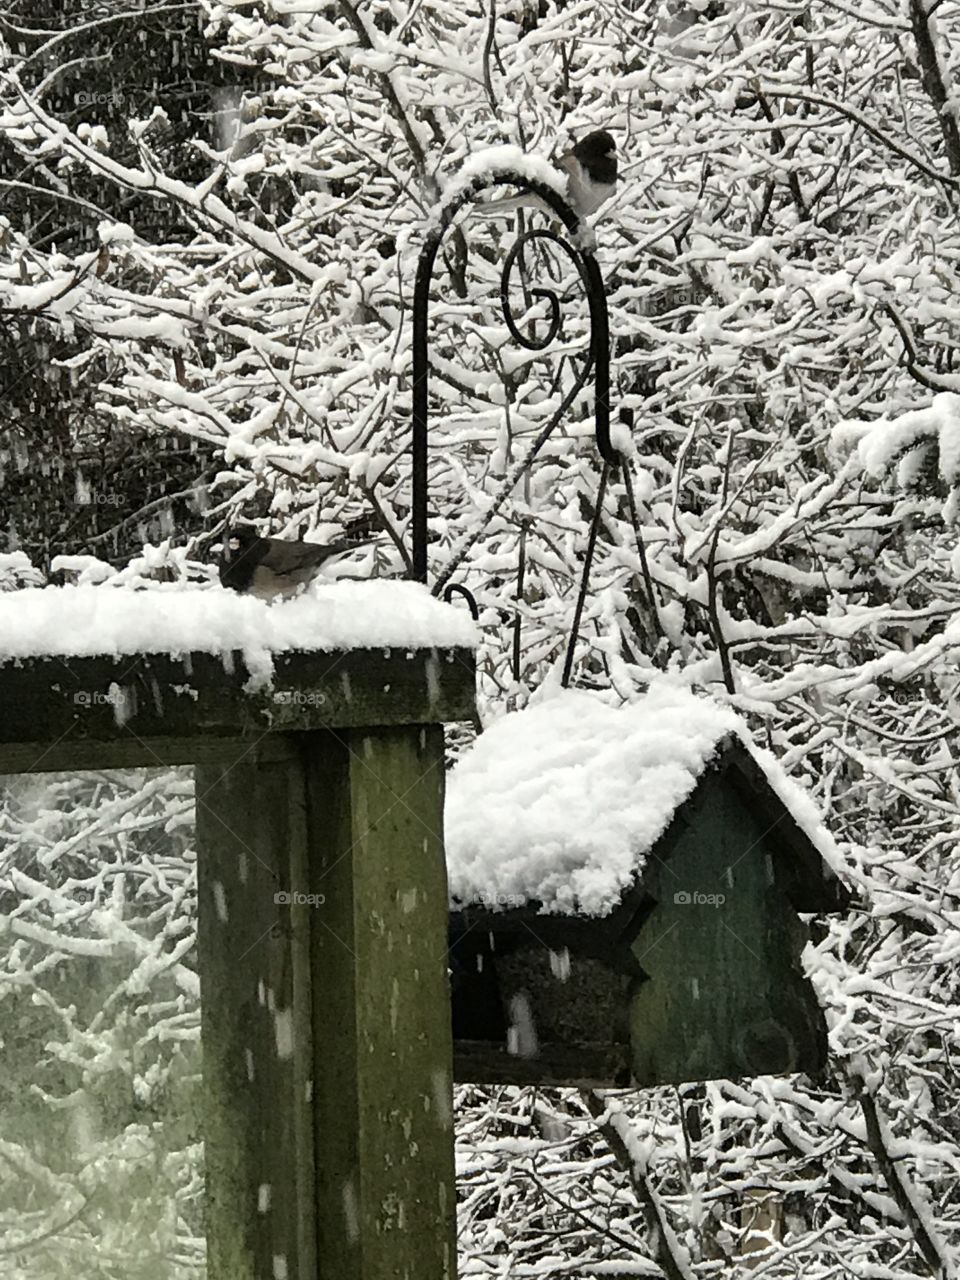 The Pacific Northwest does get some snow & our first snow was beautiful, light, powder clinging to the tiny branches creating a lacy cover. Luckily the feeder was just filled & there are a couple of Juncos happy to find an easy source of food! 🐦